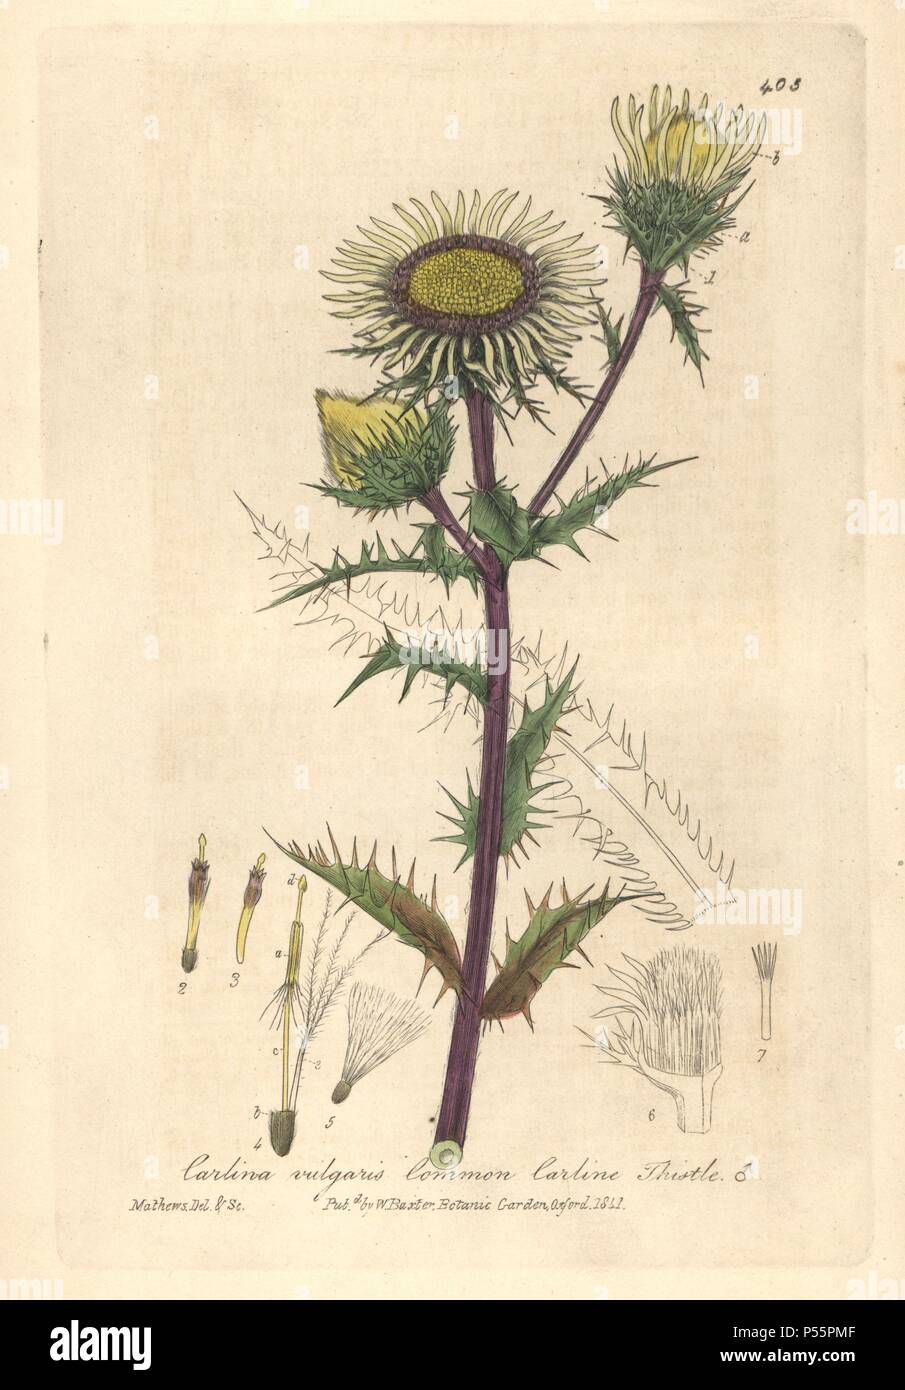 Common carline thistle, Carlina vulgaris. Handcoloured copperplate drawn and engraved by Charles Mathews from William Baxter's 'British Phaenogamous Botany,' Oxford, 1841. Scotsman William Baxter (1788-1871) was the curator of the Oxford Botanic Garden from 1813 to 1854. Stock Photo